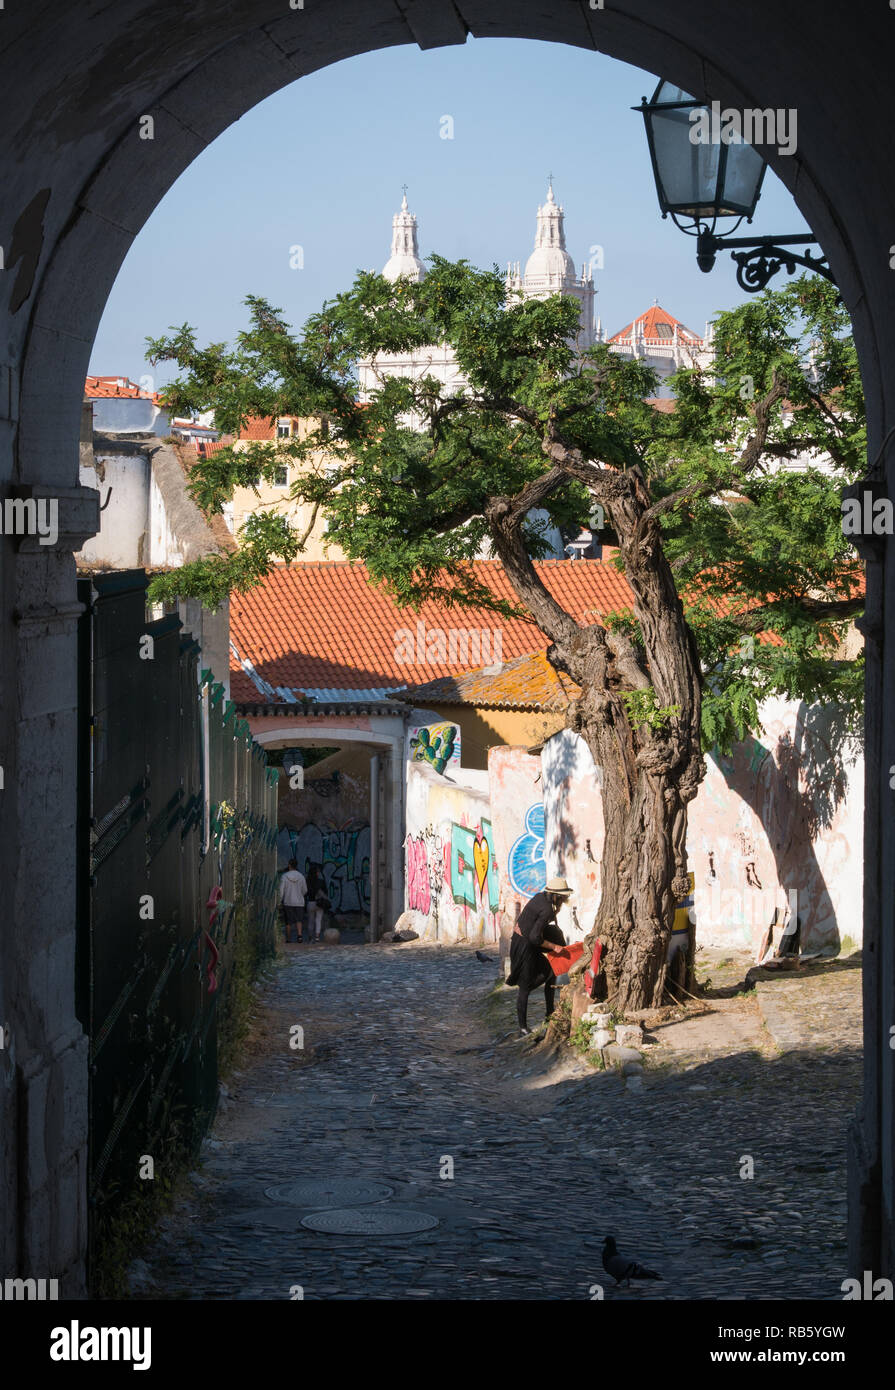 Lisbon, Portugal - May 27th 2018: Street artist under a tree with St. Vincent church in background photographed out of tunnel Stock Photo